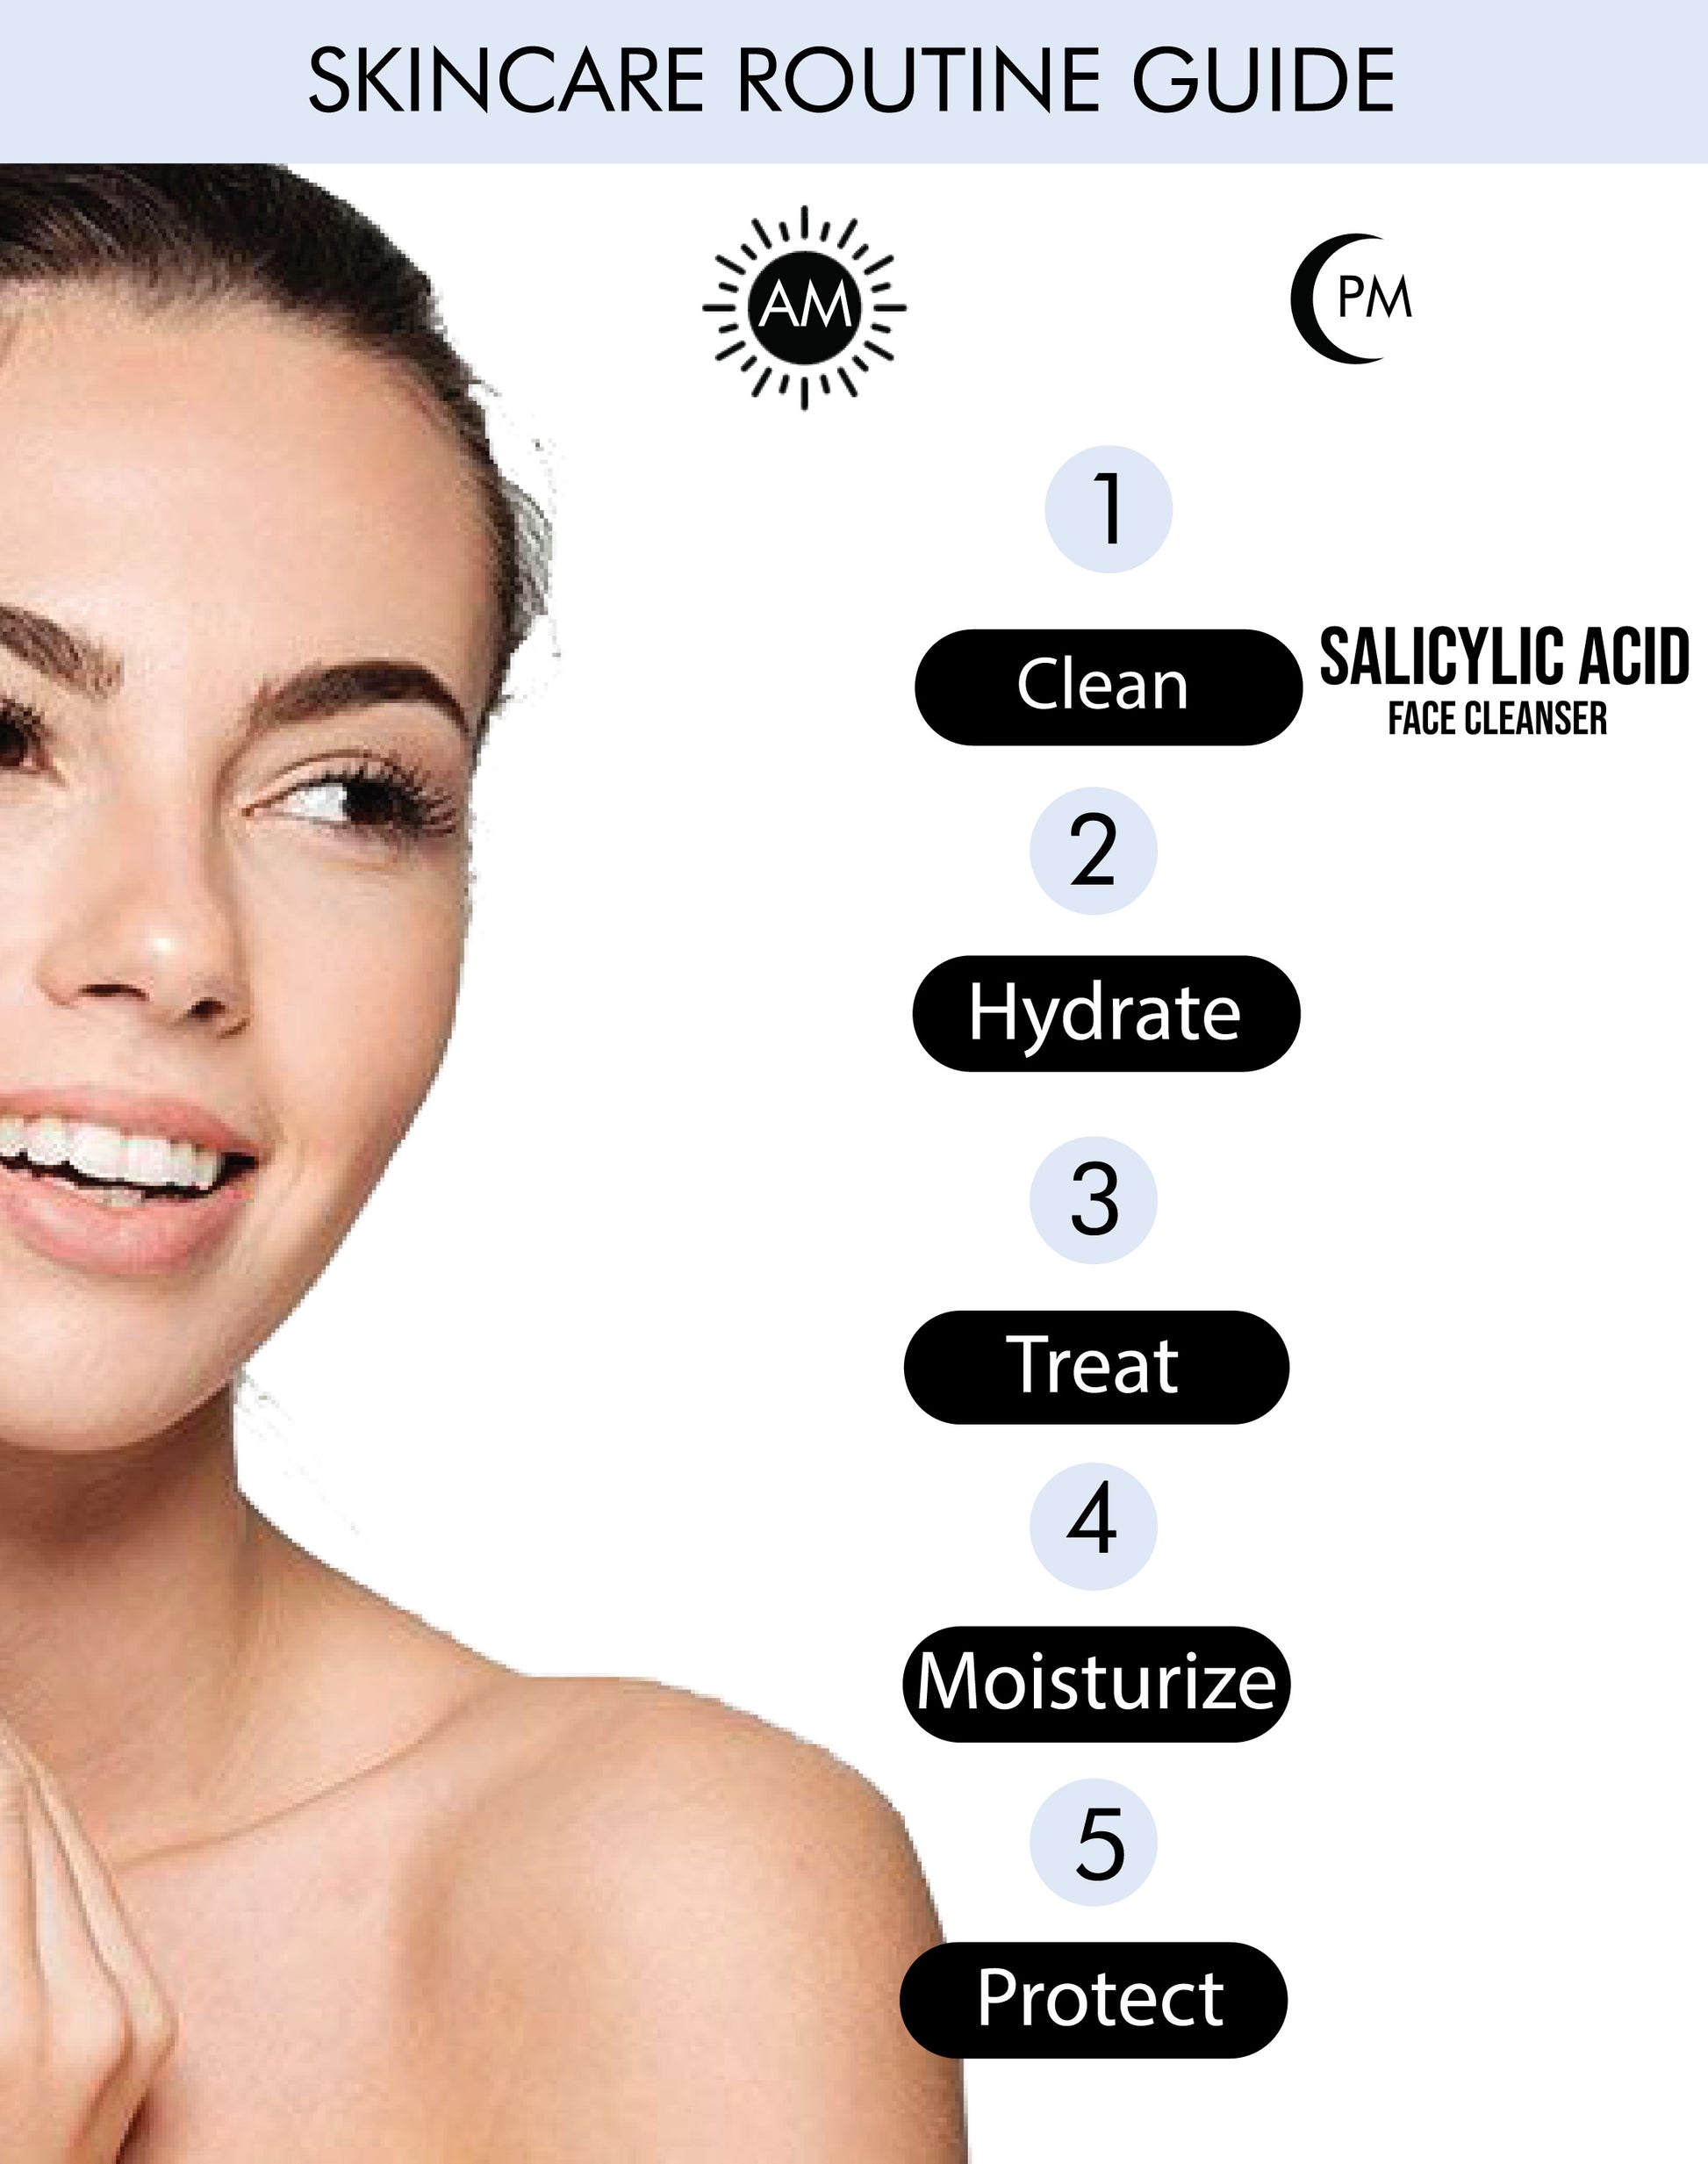 SALICYLIC ACID CLEANSER SKINCARE ROUTINE GUIDE